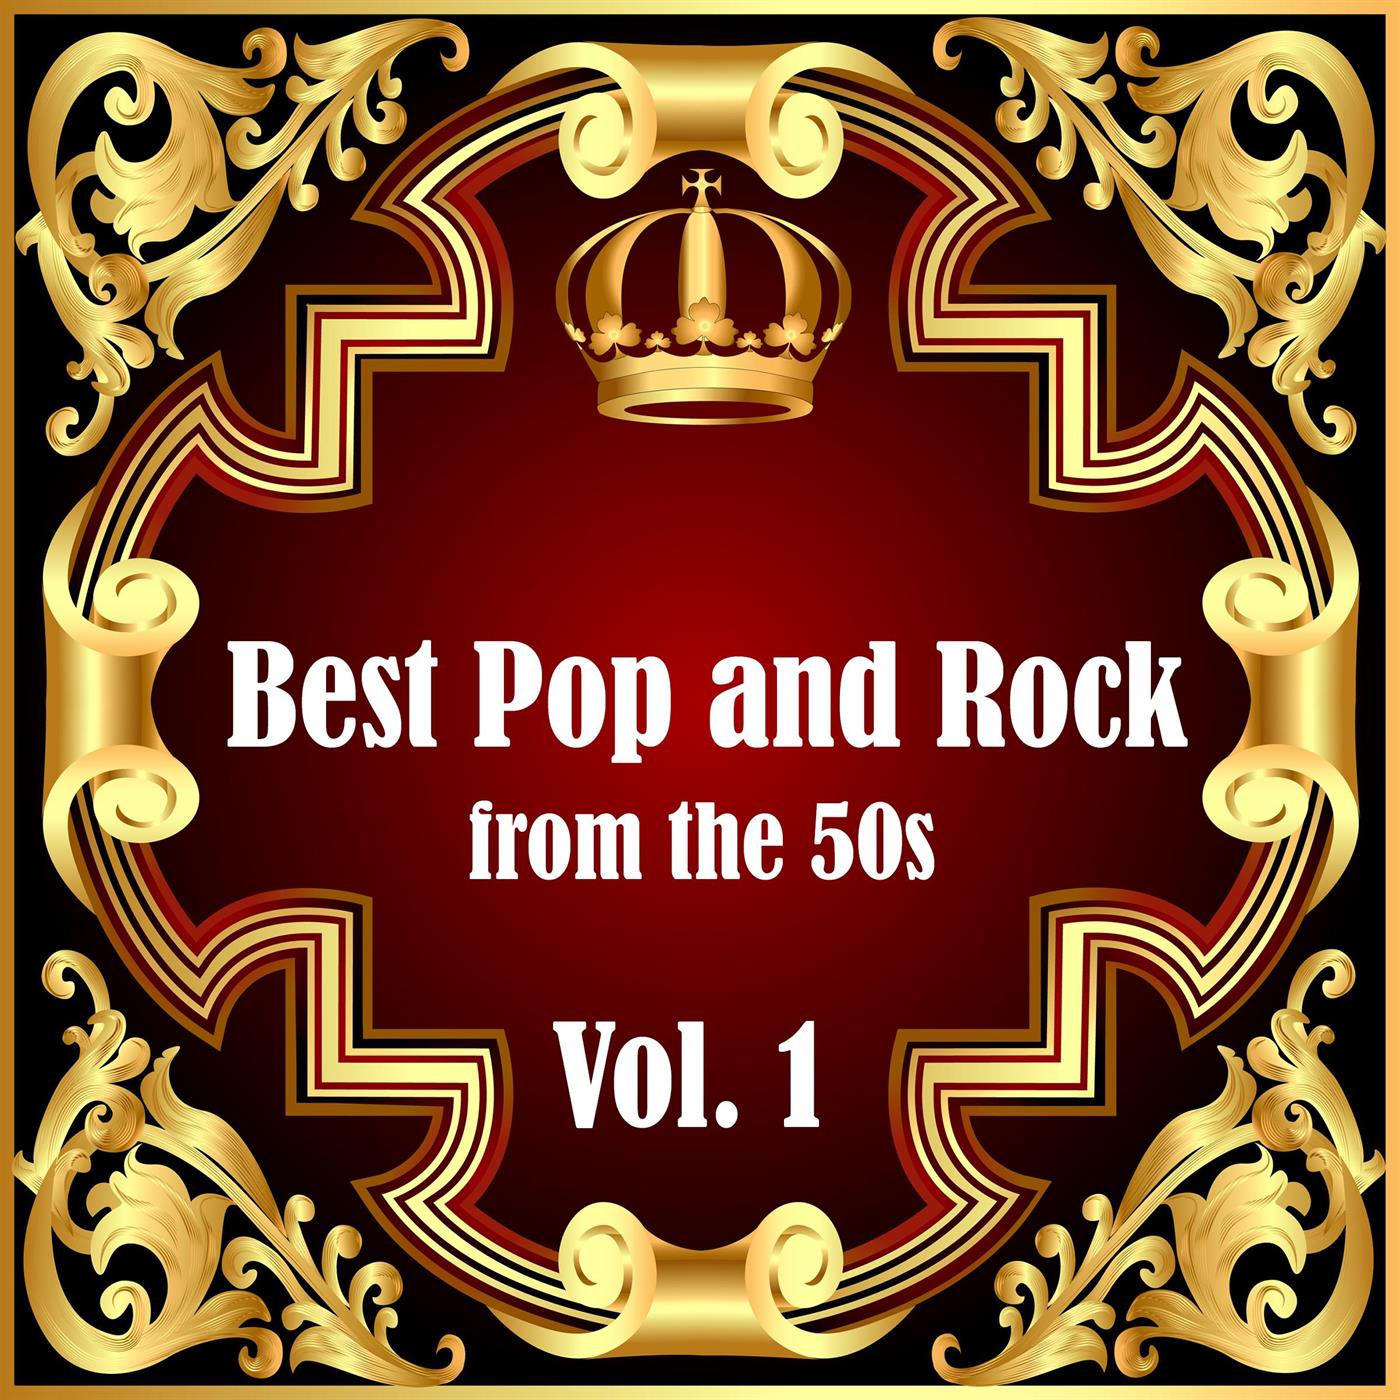 Best Pop and Rock from the 50s Vol 1